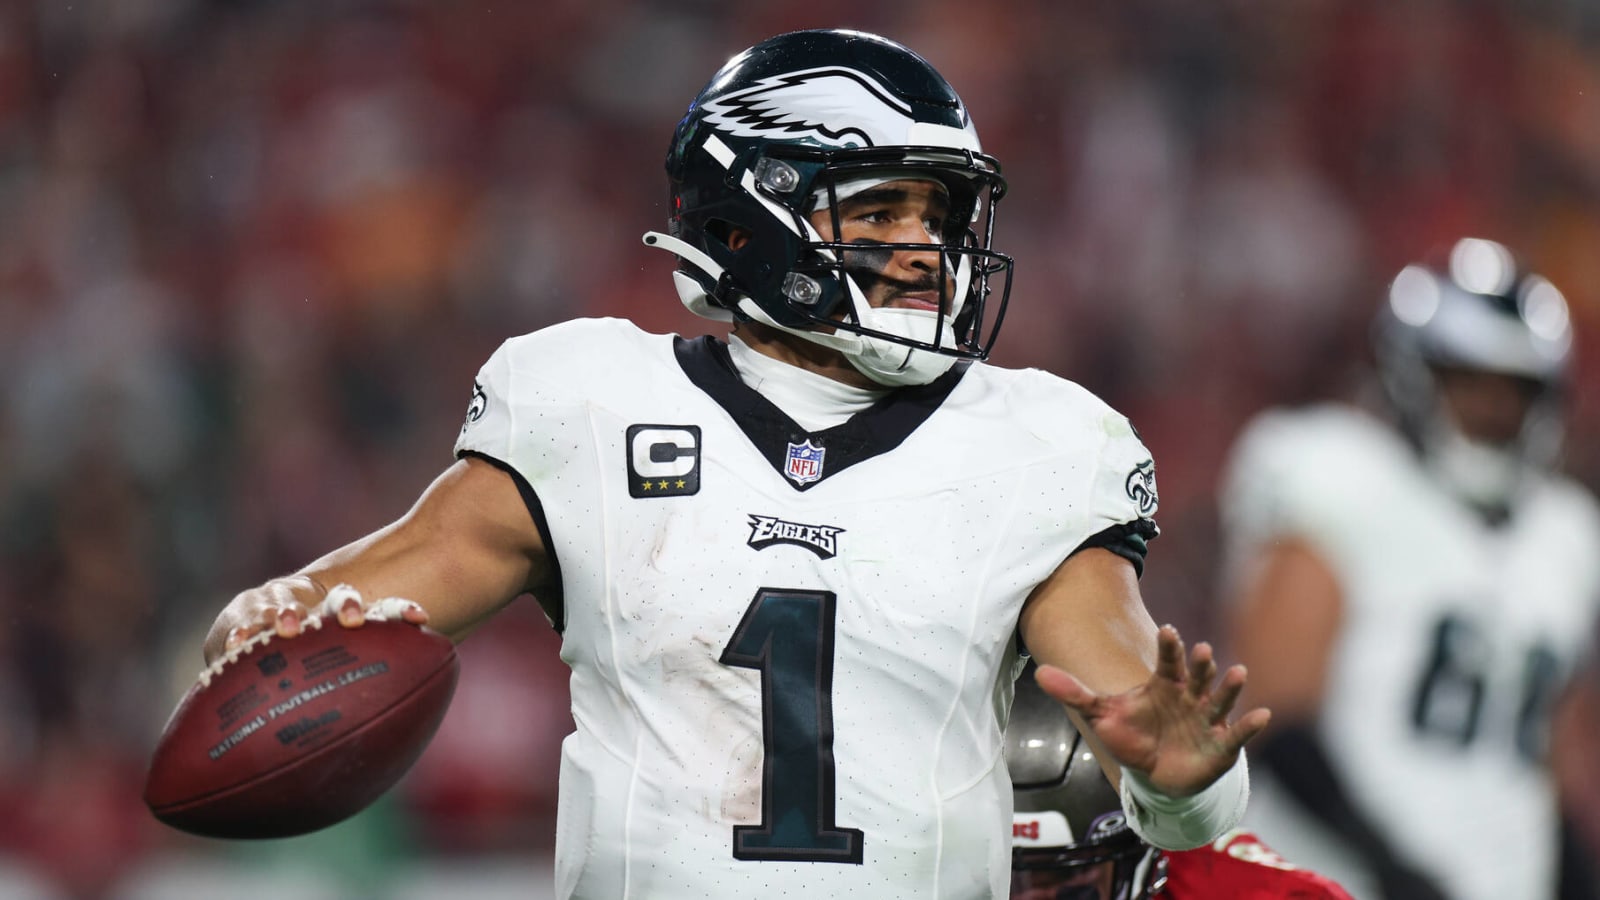 Jalen Hurts claims he seeks something the Eagles have failed to provide